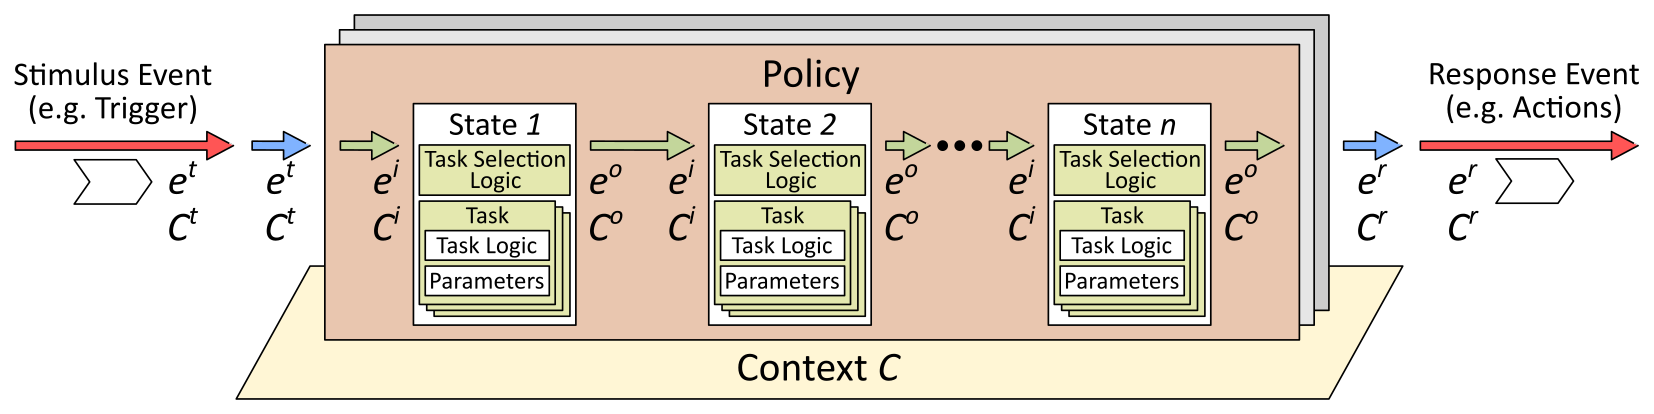 APEX States and Context